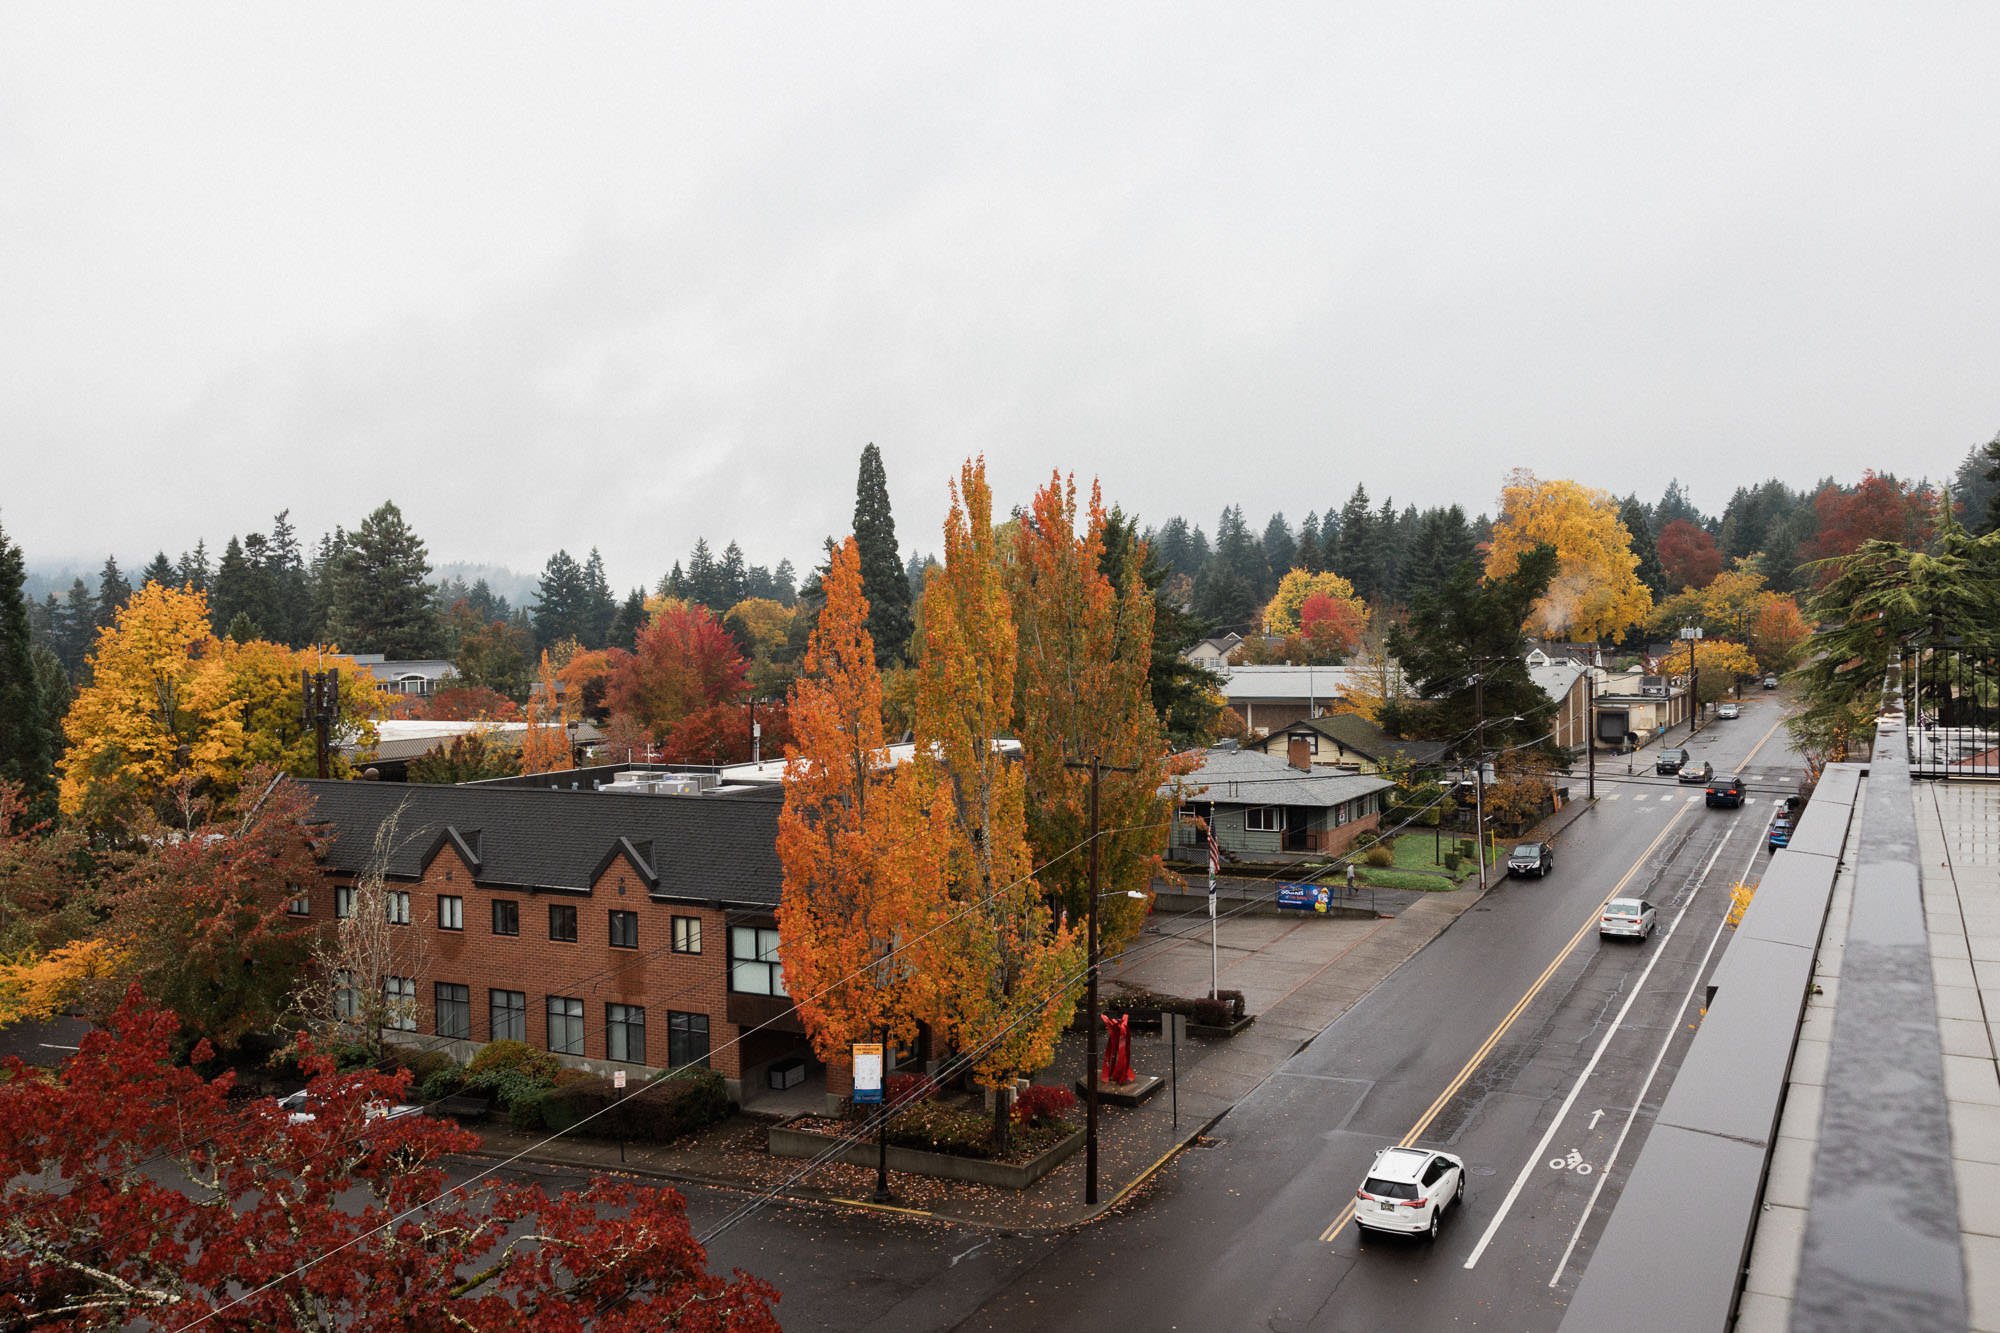 view of street during rainy fall day at ironlight wedding venue in lake oswego, oregon